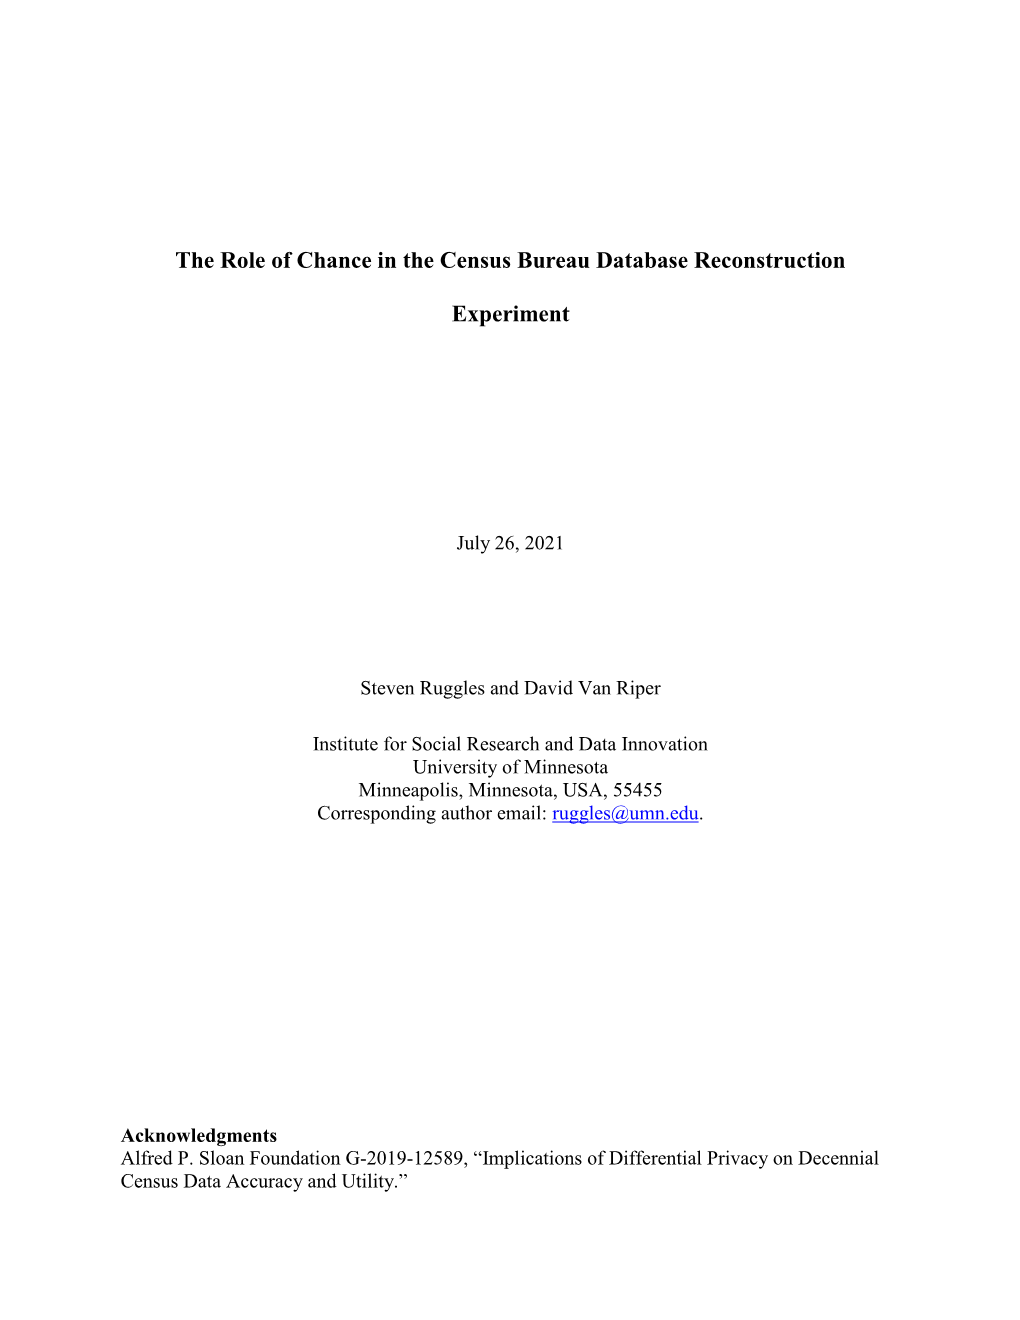 The Role of Chance in the Census Bureau Database Reconstruction